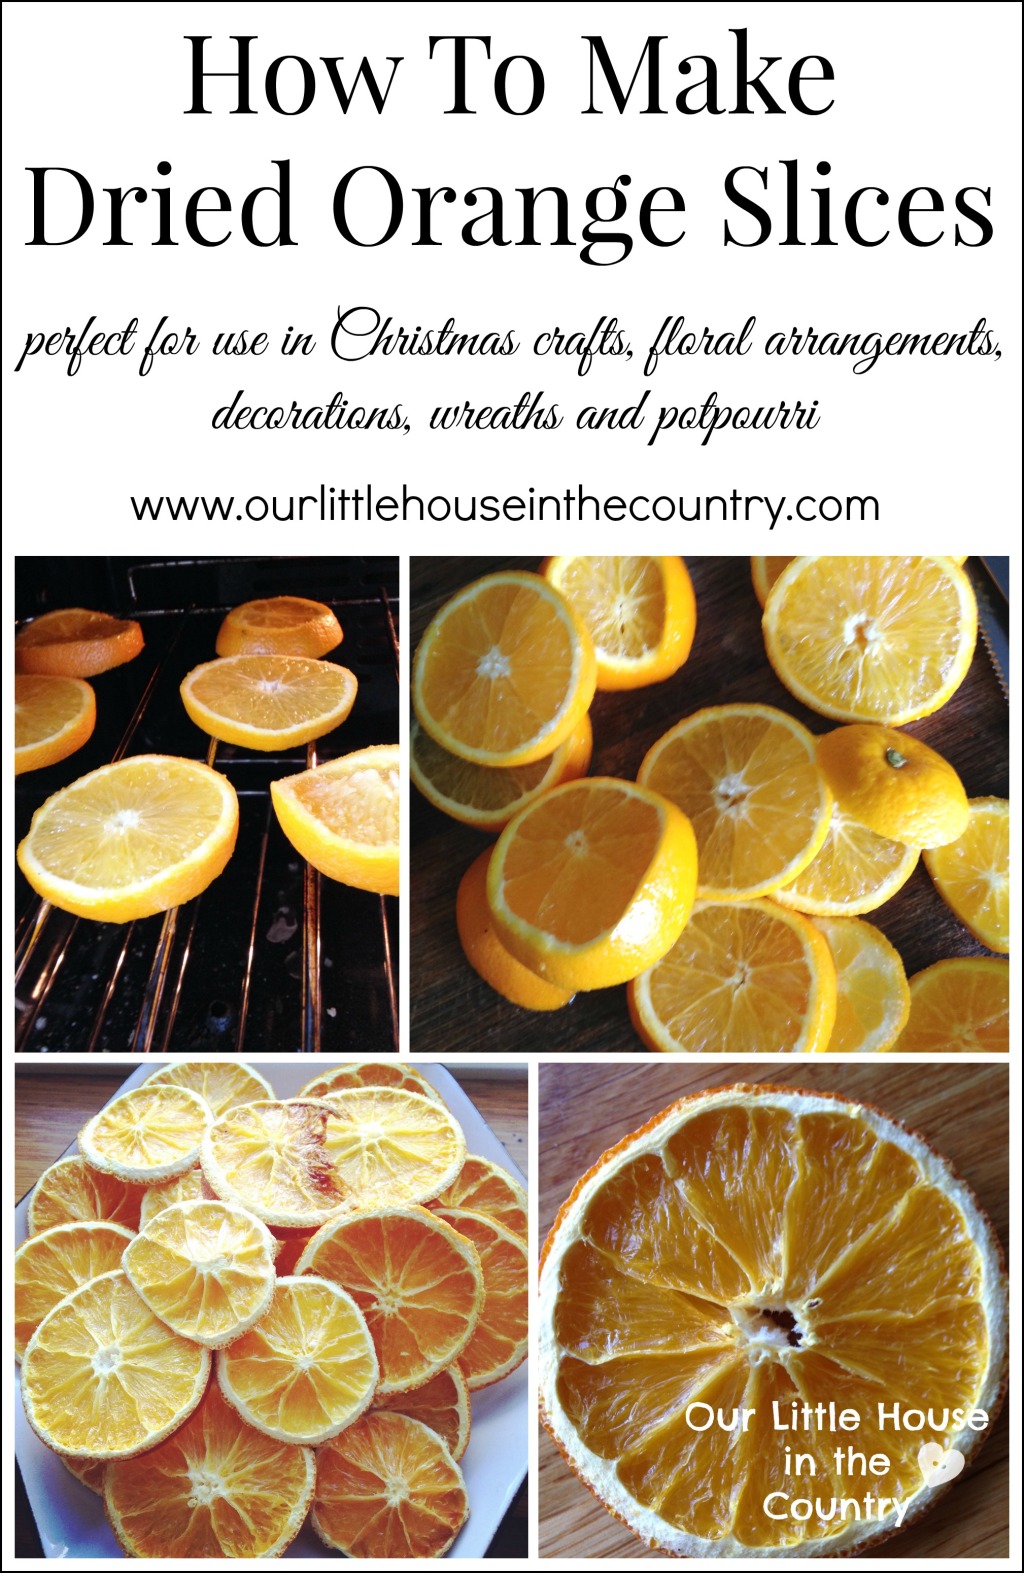 https://ourlittlehouseinthecountry.files.wordpress.com/2014/10/how-to-make-dried-orange-slices-perfect-for-use-in-christmas-crafts-wreaths-decorations-and-floral-arrangements-our-little-house-in-the-country-cover.jpg?w=1024